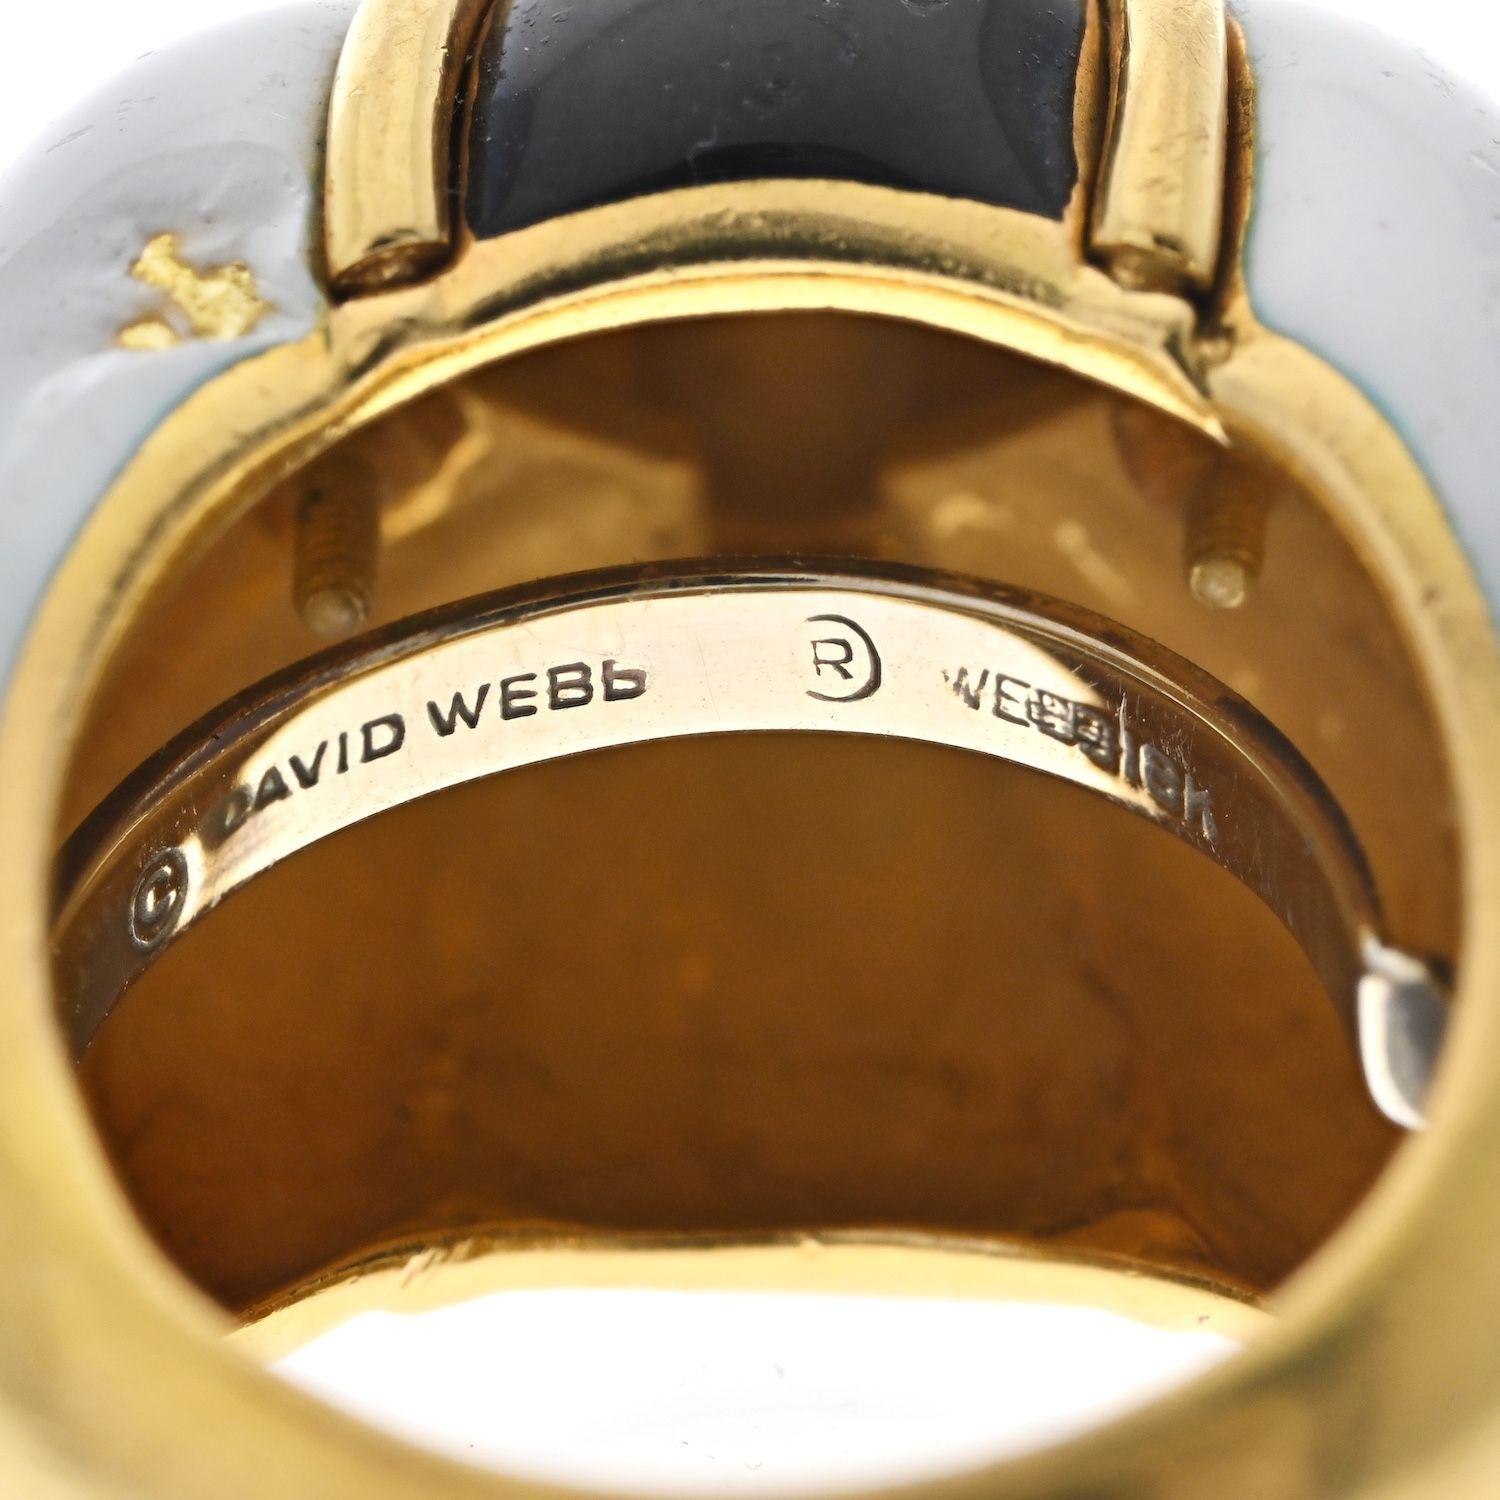 David Webb is known for his fun bombe rings. This one is no exception: decorated with alternating black and white stripes and gold arches contouring each section. 
Some enameling is missing as well as one of the gold arches. 
Overall good condition,